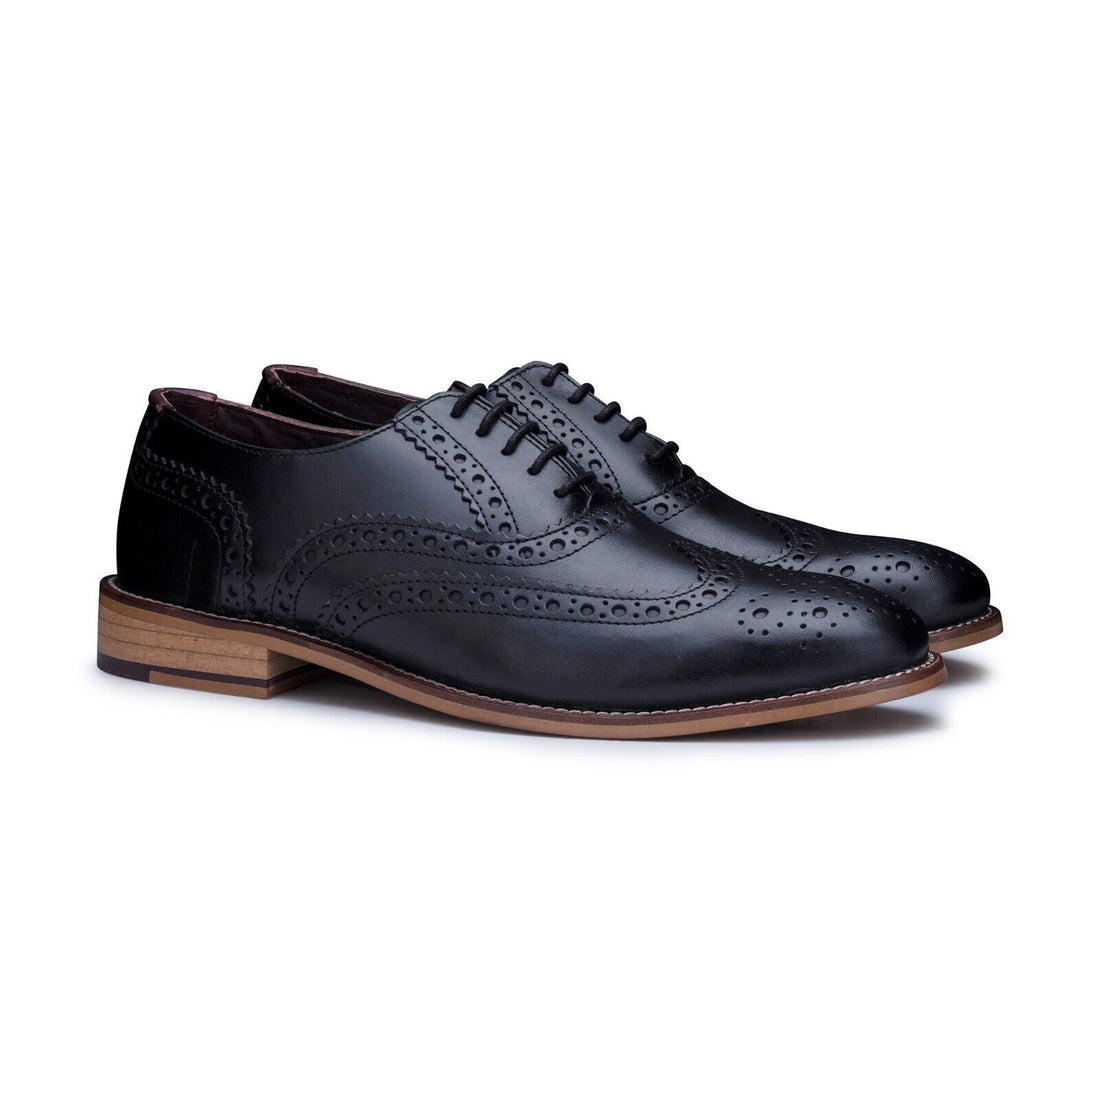 Mens Classic Oxford Black Leather Gatsby Brogue Shoes